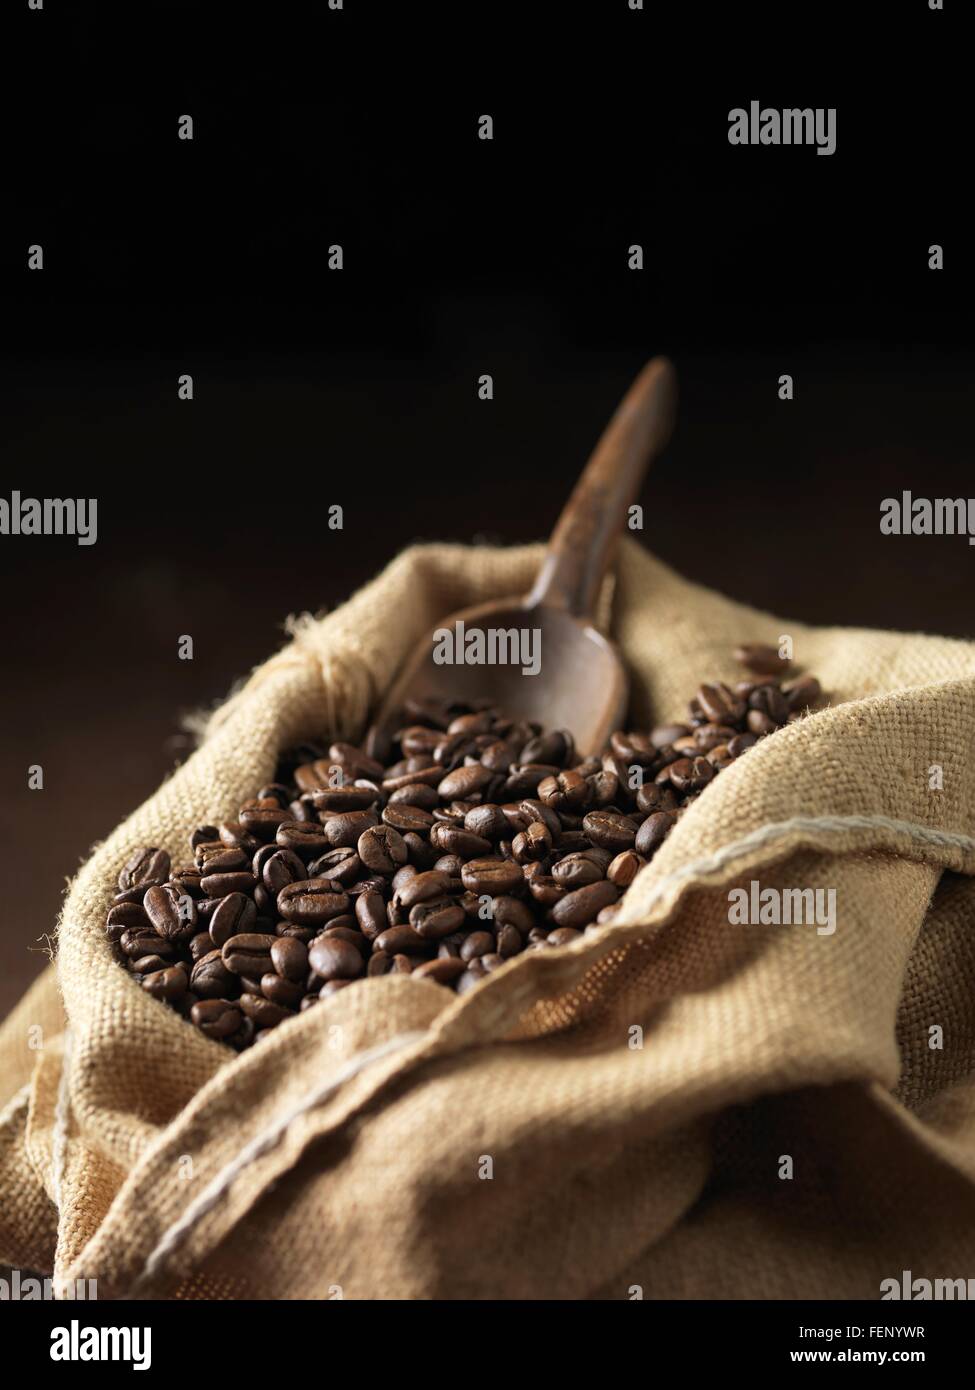 Coffee beans and wooden scoop in woven sack Stock Photo